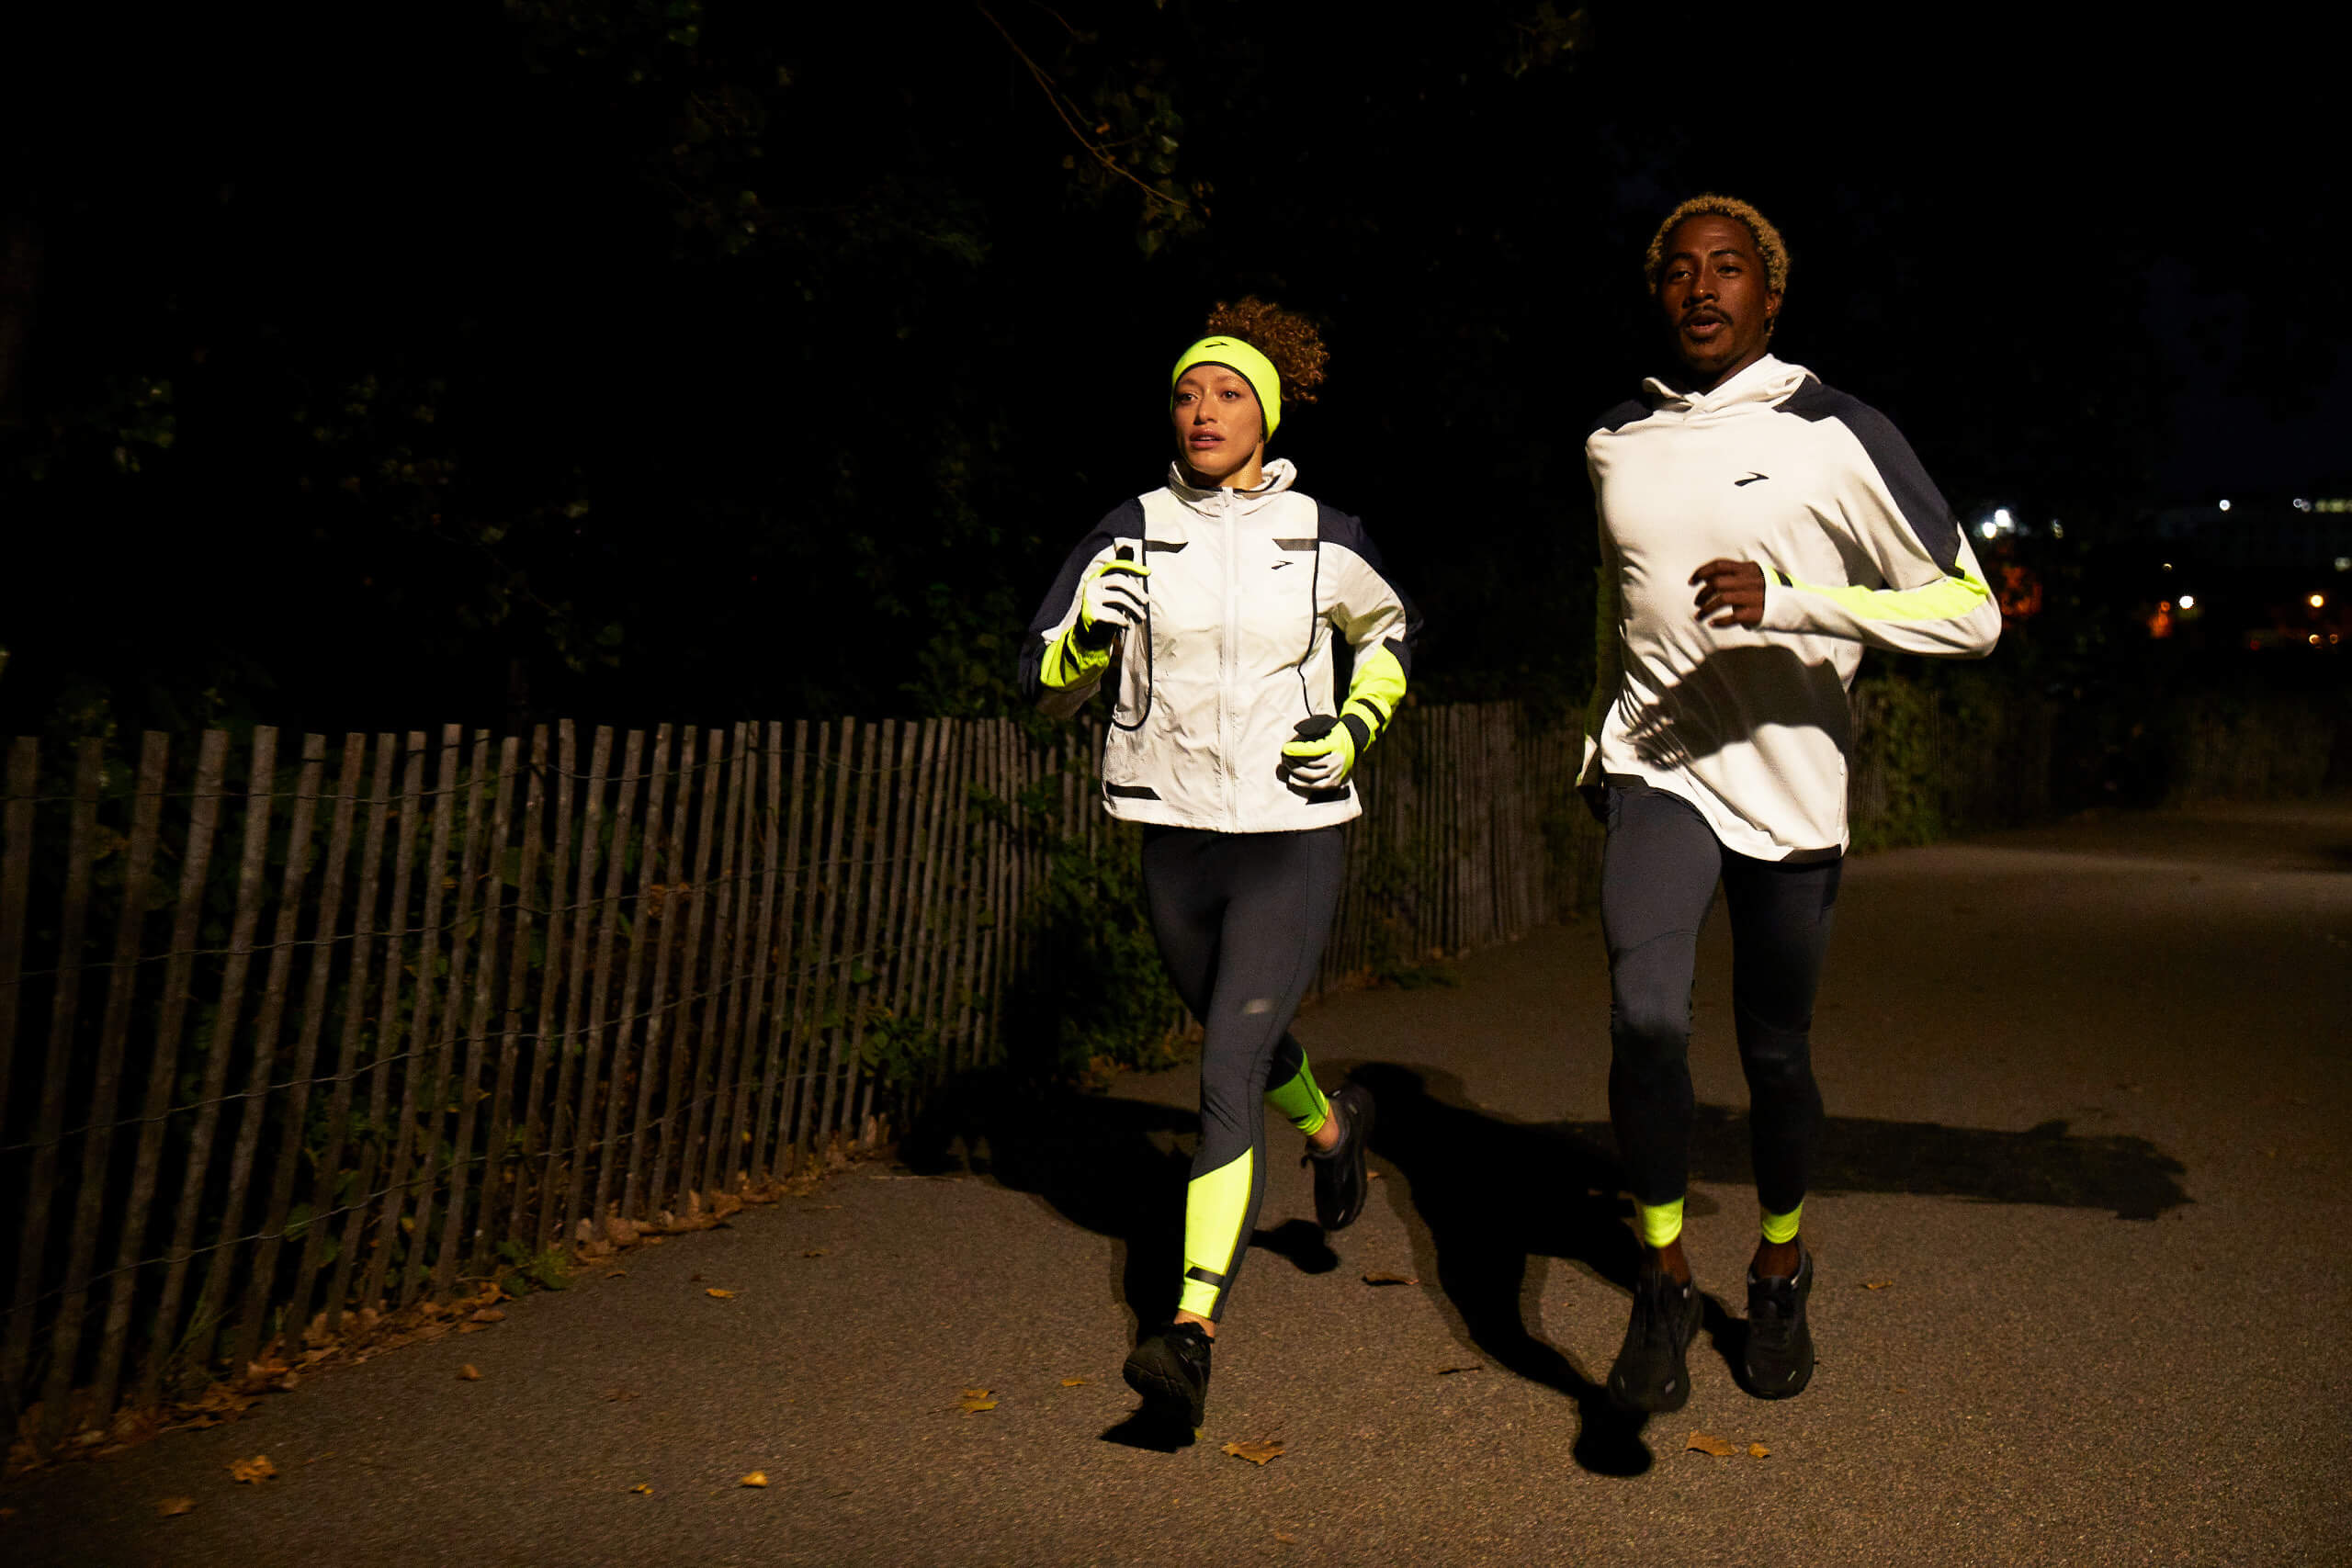 Two people running in reflective clothing